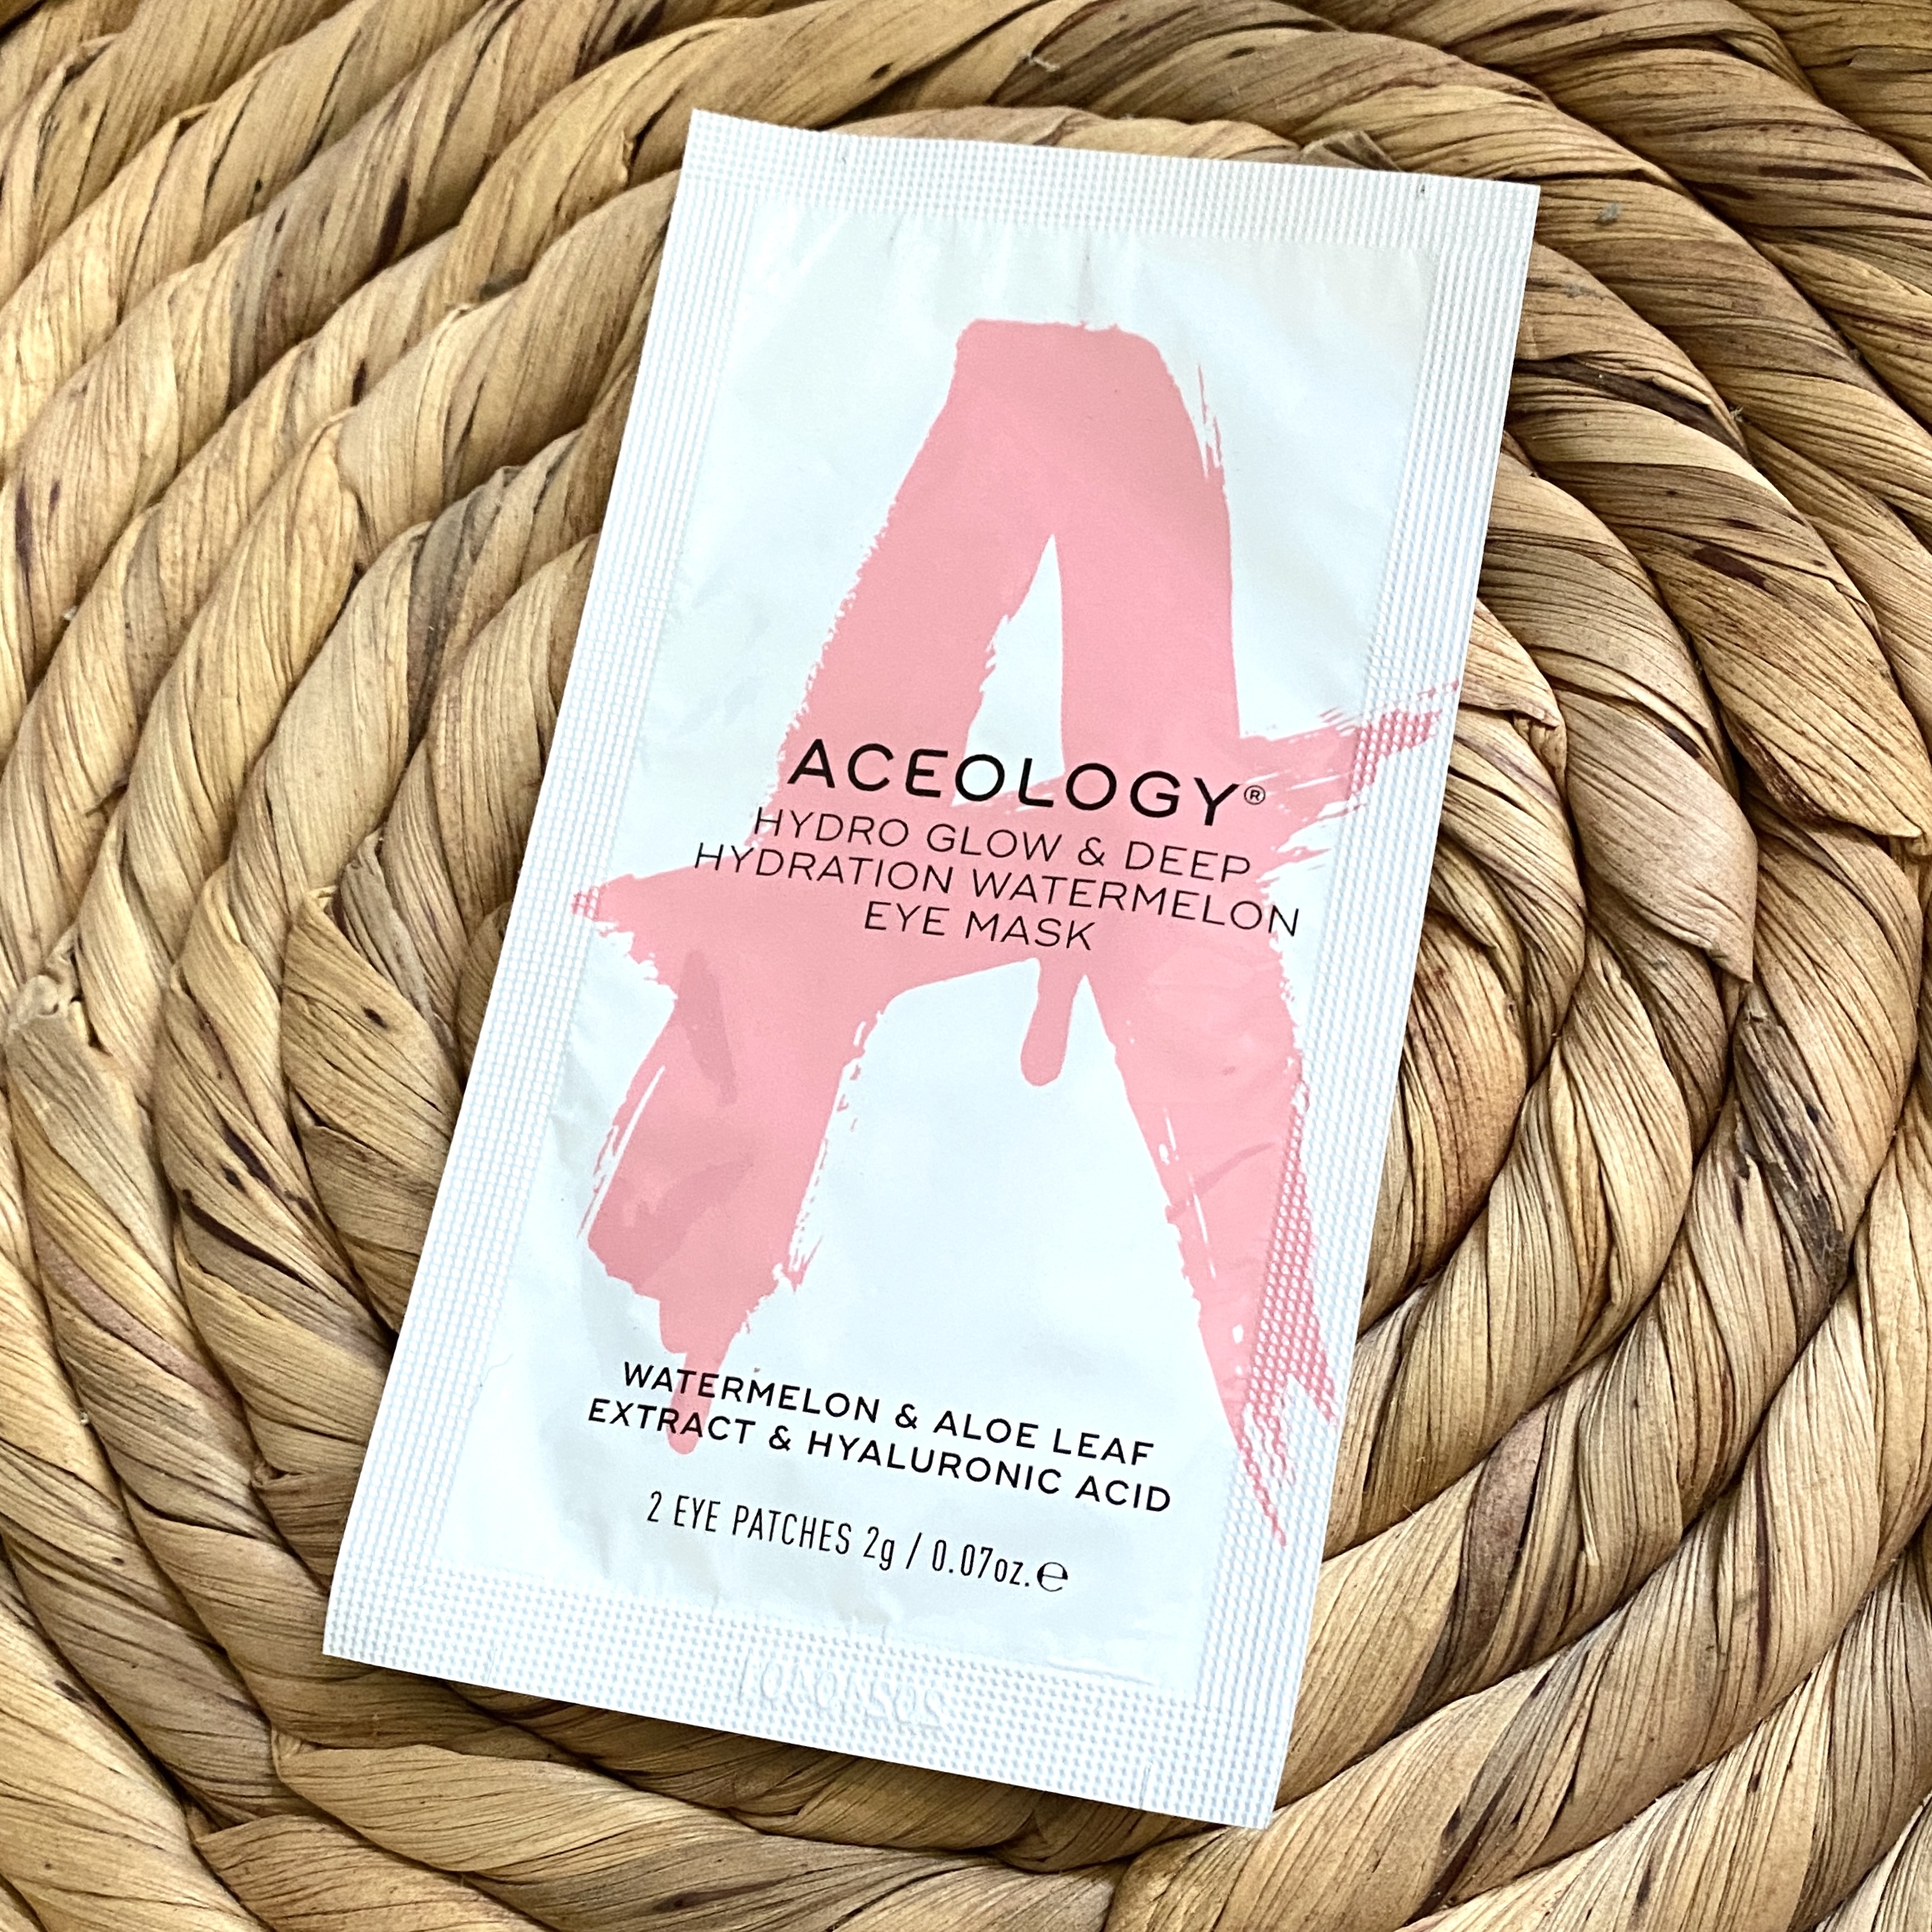 Front of Aceology Hydra Glow and Deep Hydration Watermelon Eye Mask for Birchbox September 2021